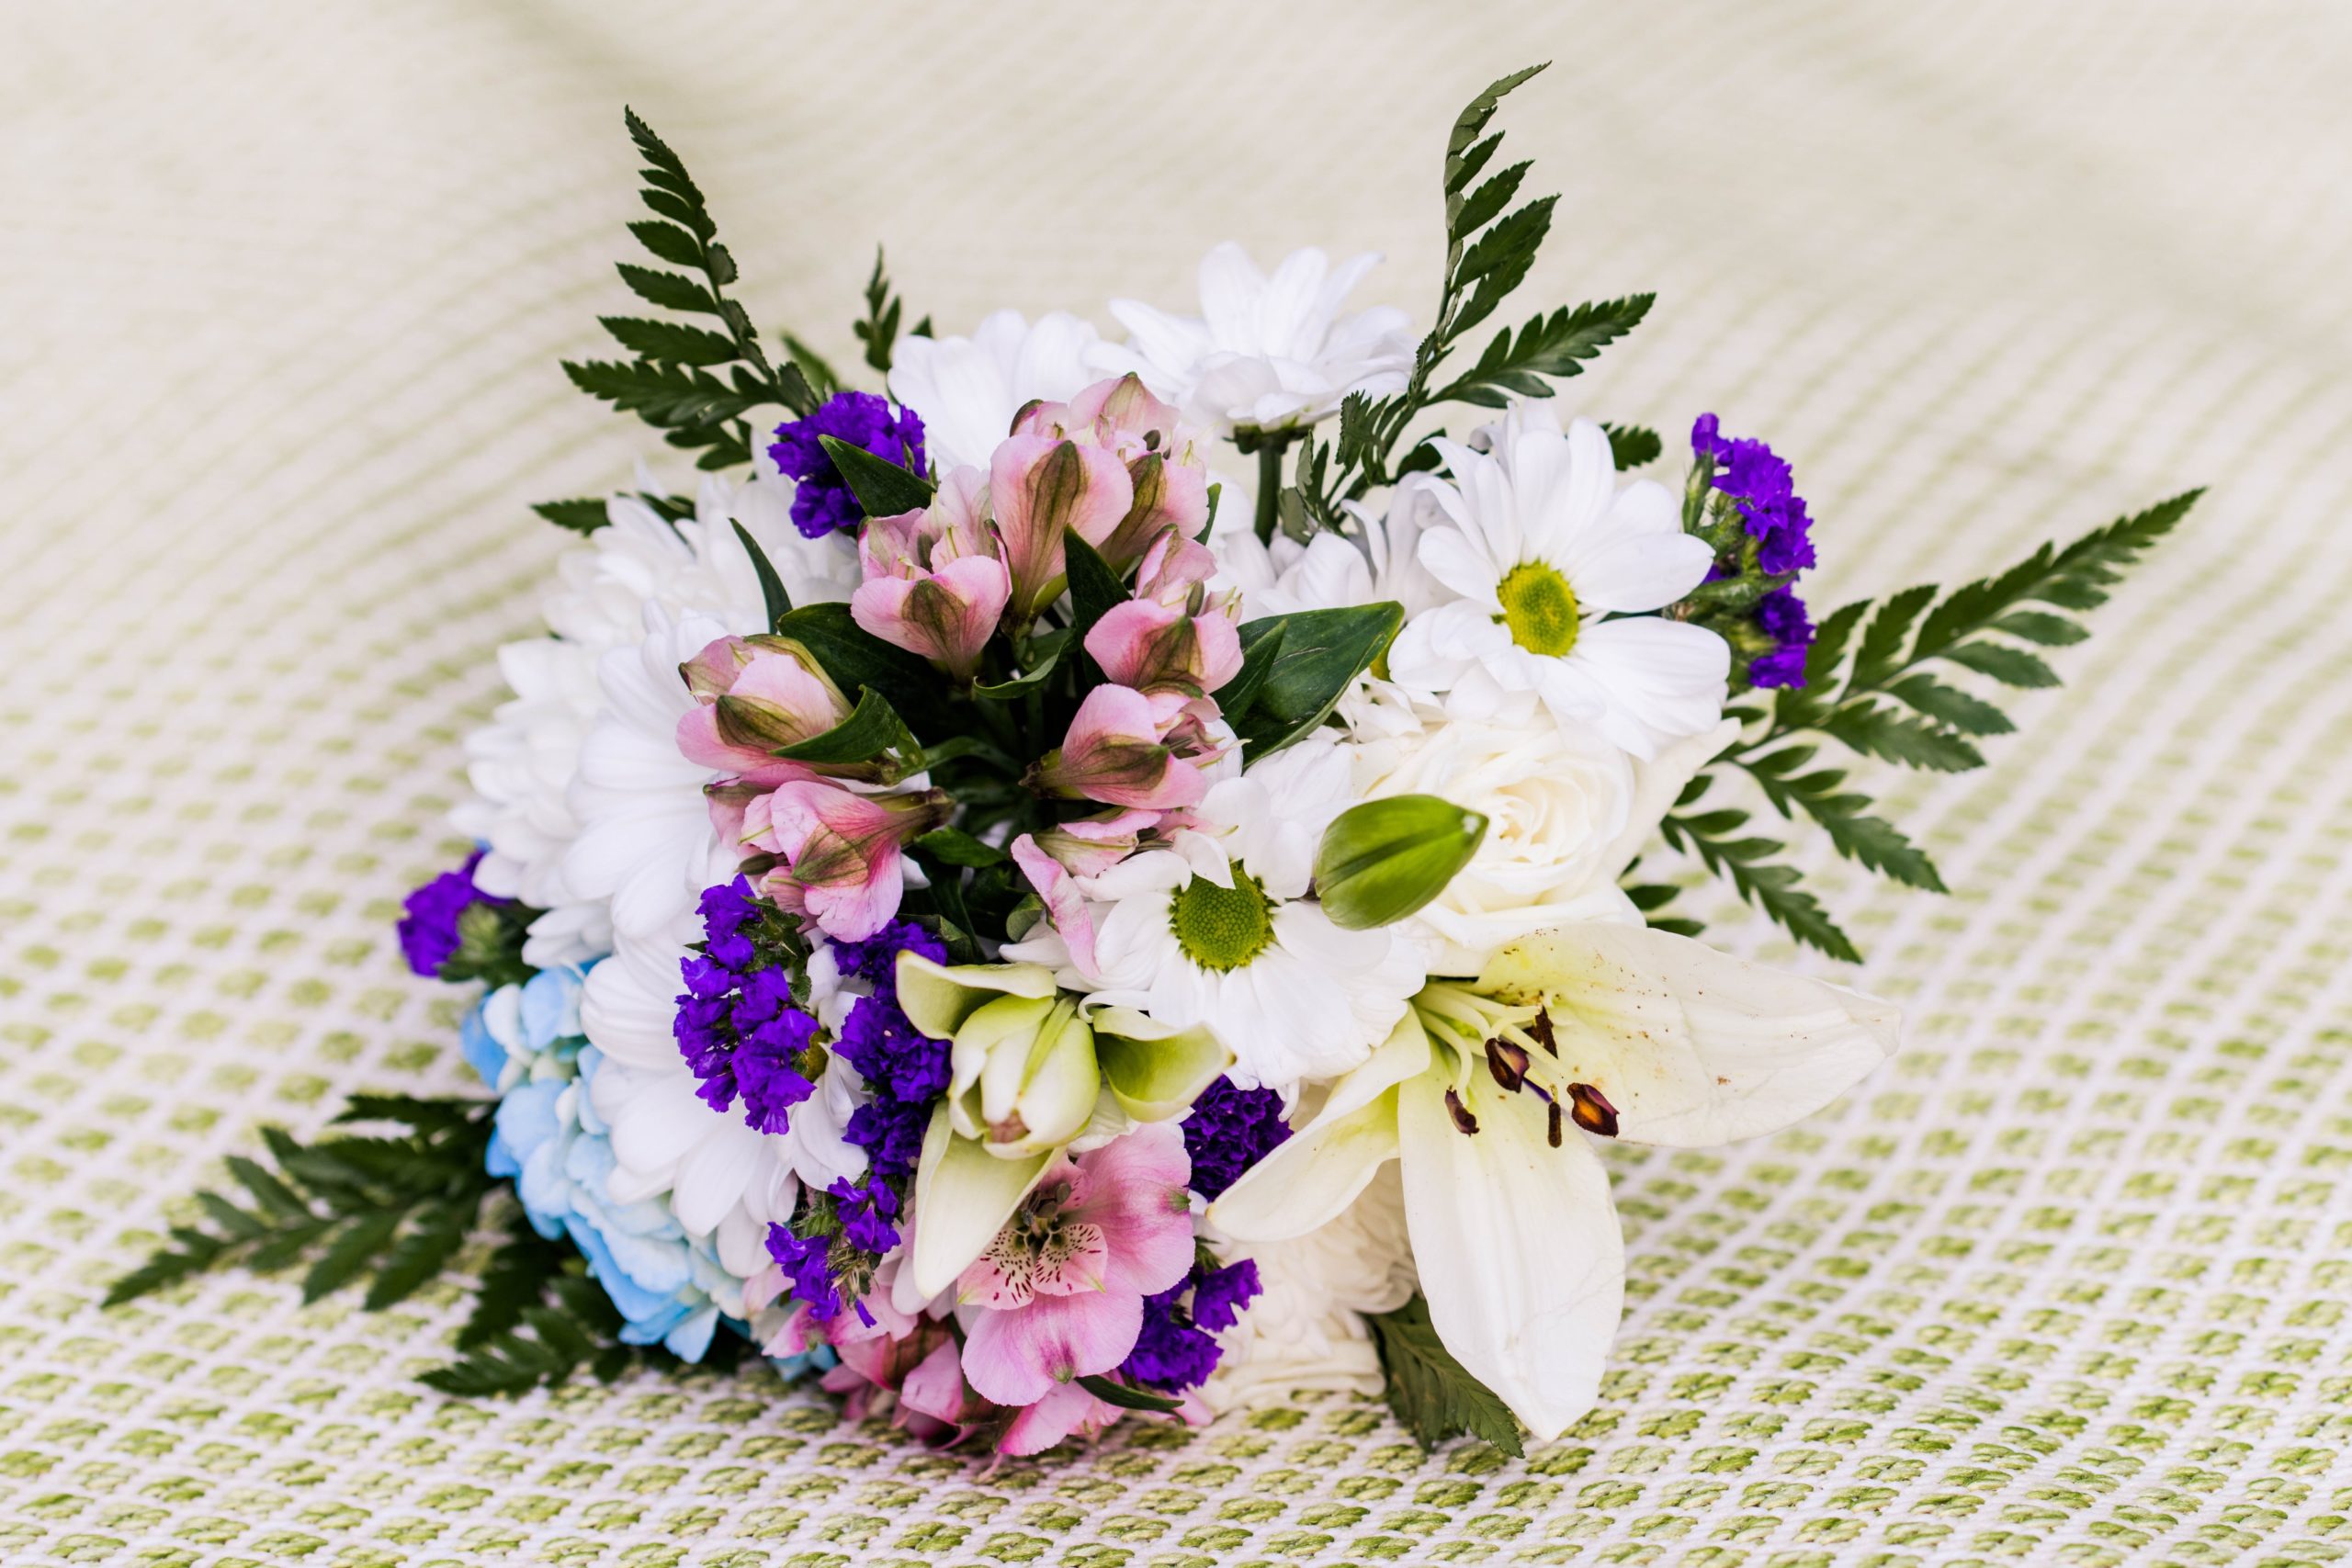 Bridal bouquet detail photos with white, blue, pink and purple flowers.